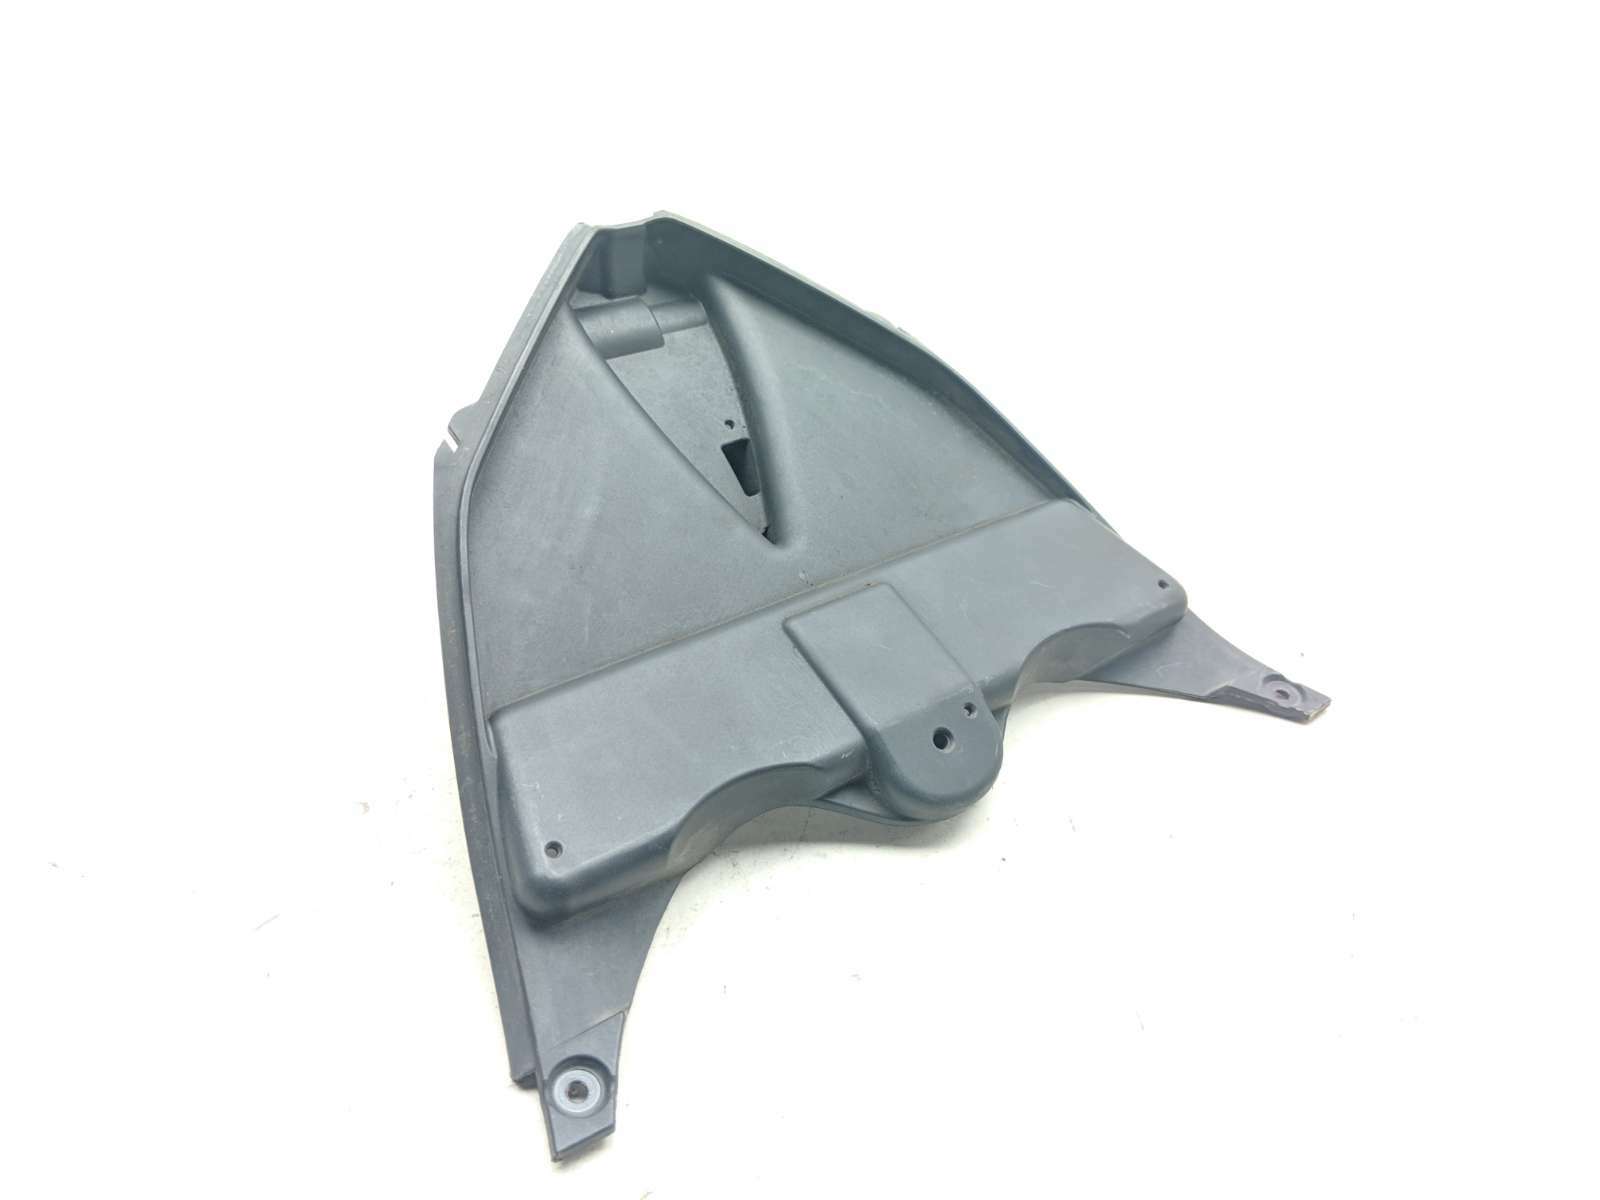 13 Ducati Multistrada 1200 Lower Front Fairing Cover Panel 48012931A